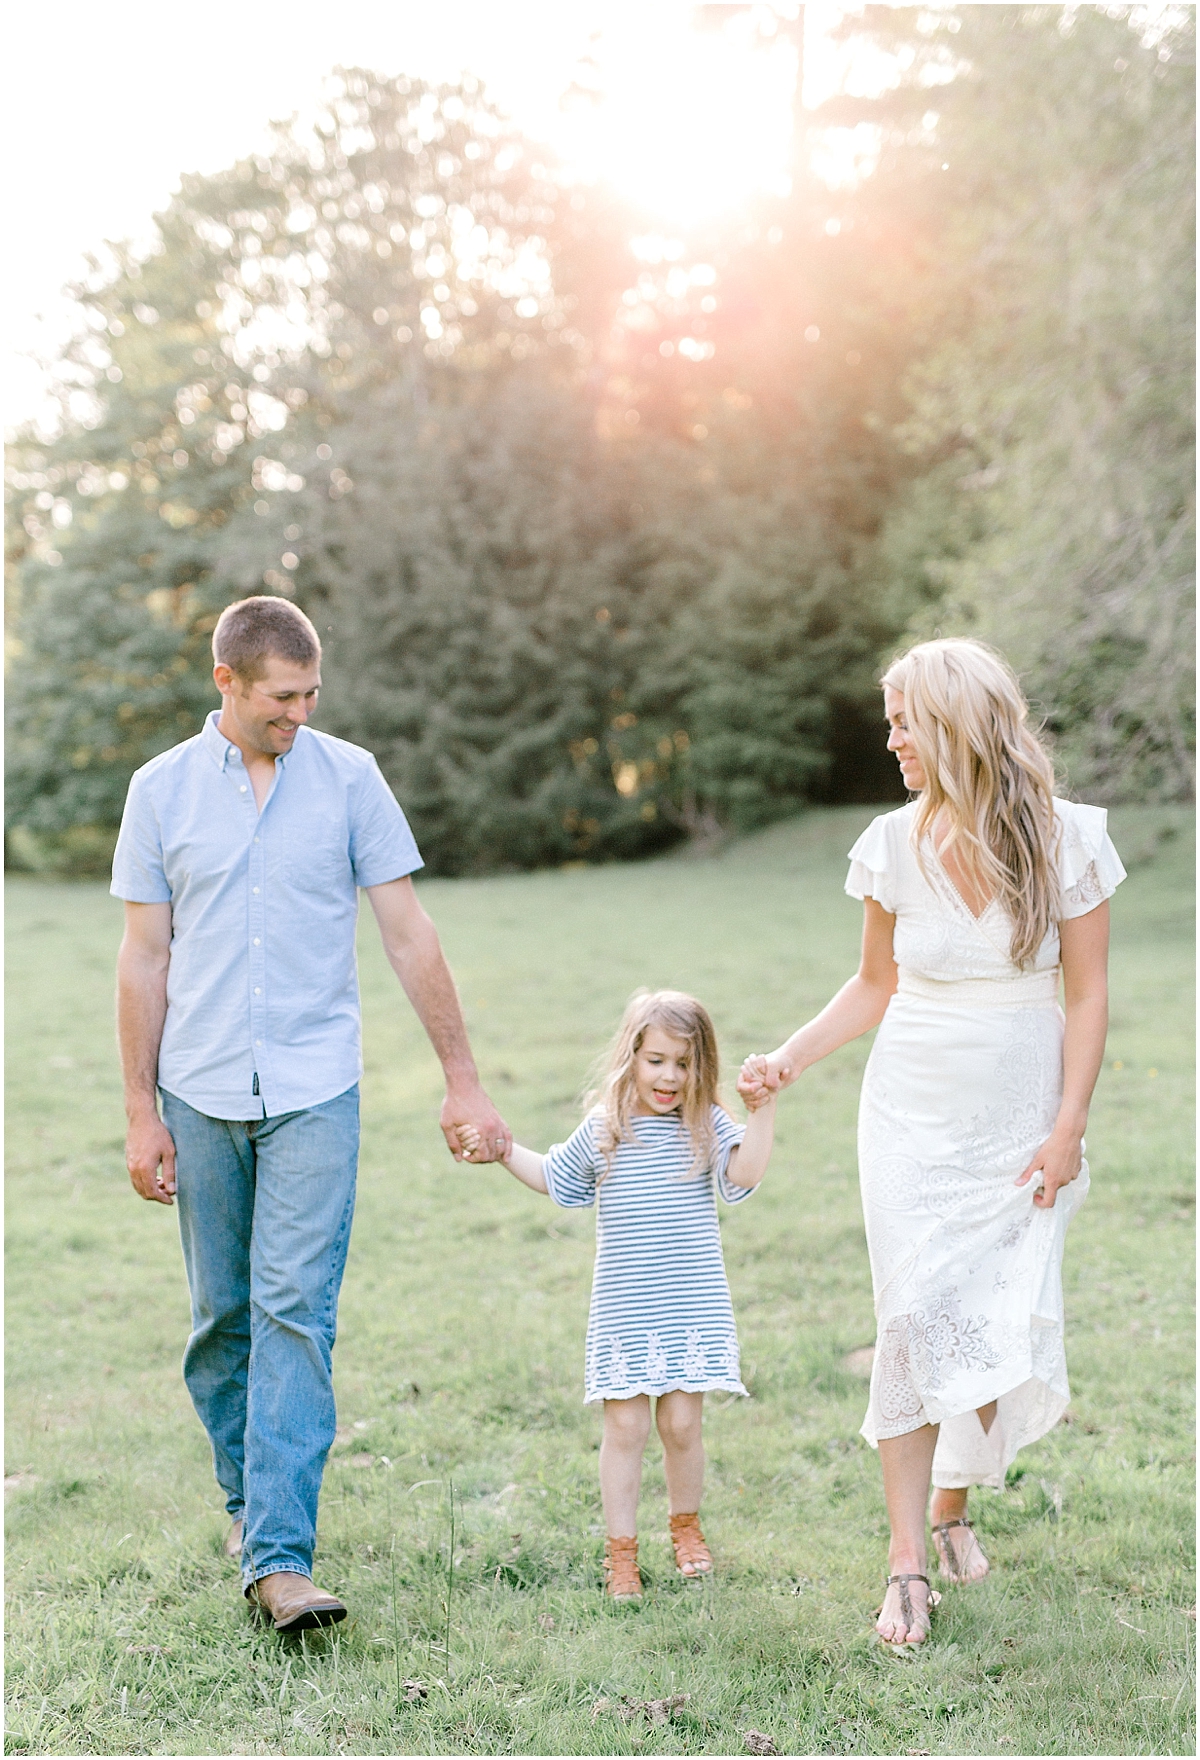 Emma Rose Company Family Pictures, What to Wear to Family Portraits, Lora Grady Photography, Seattle Portrait and Wedding Photographer, Outdoor Family Session, Anthropologie White Farm Dress18.jpg